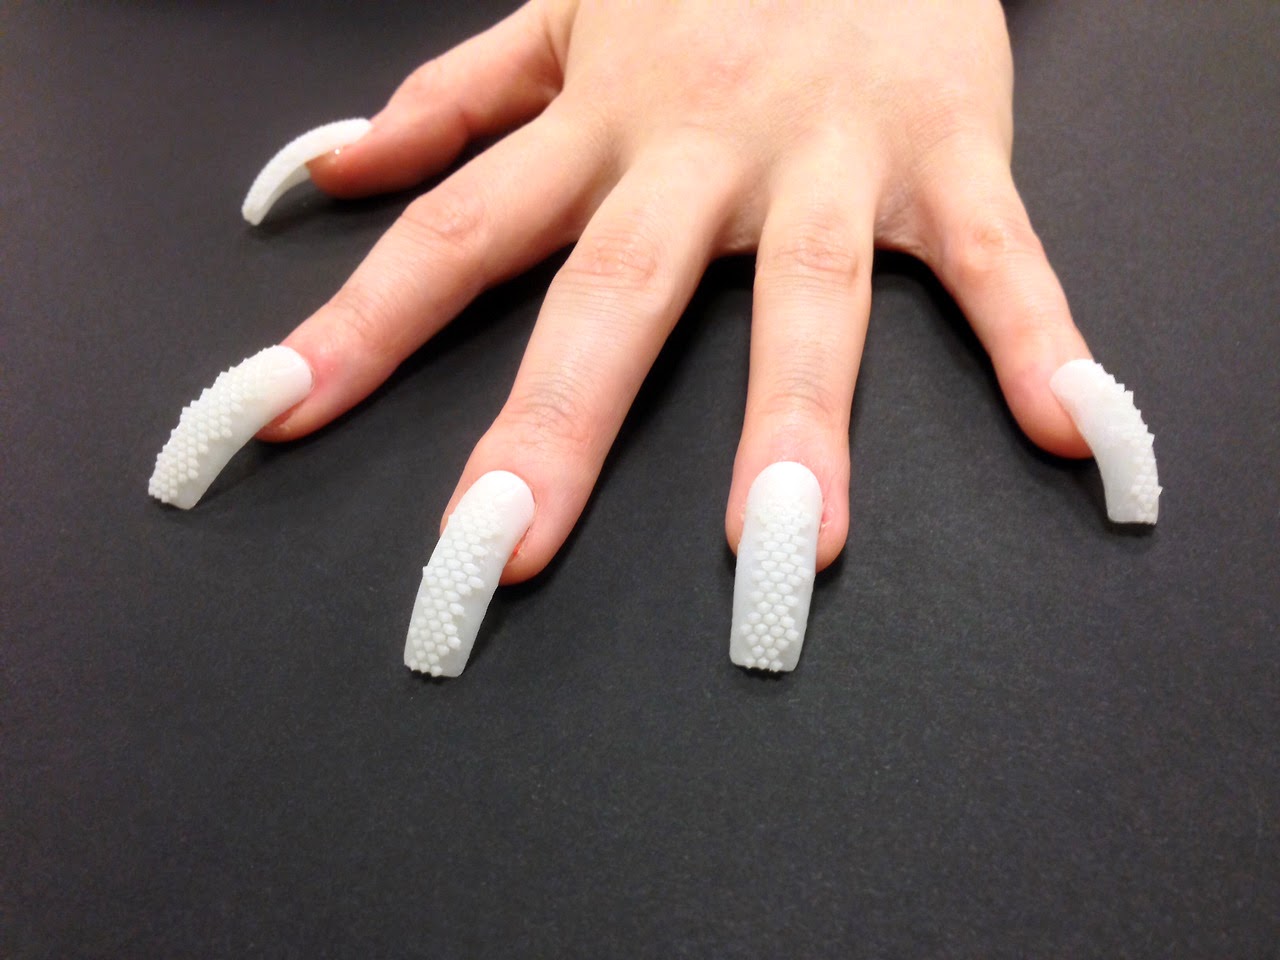 3. "3D Printed Nails" - wide 5